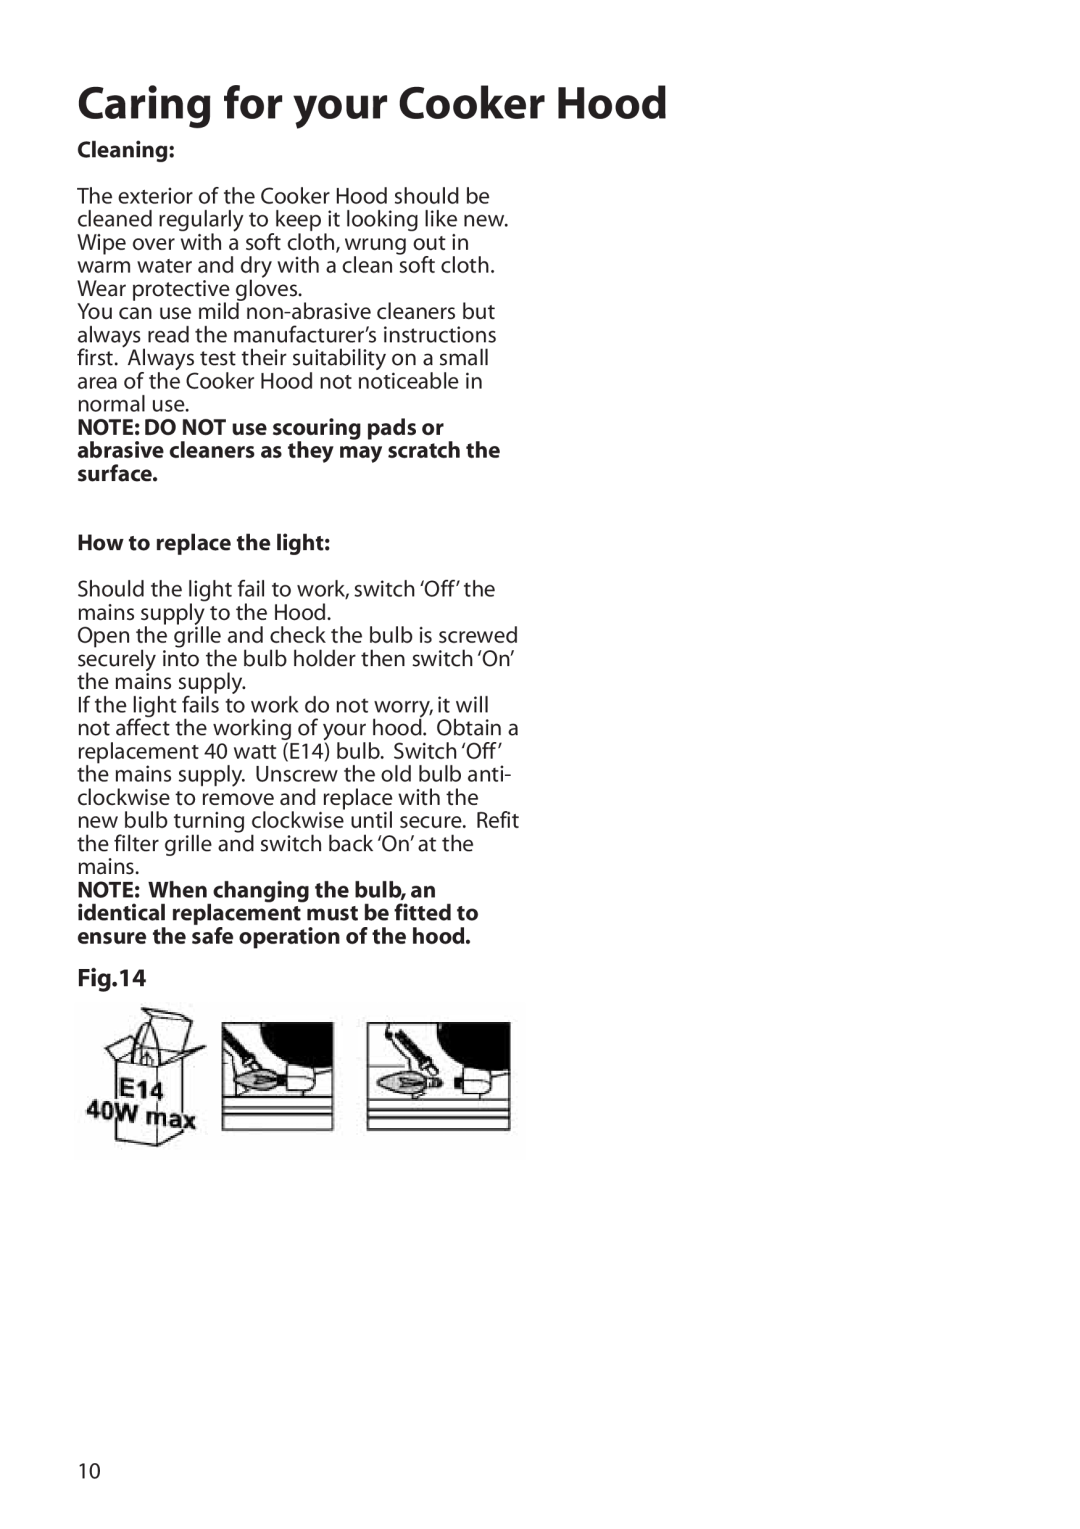 Hotpoint HTV10 manual Caring for your Cooker Hood, Cleaning, How to replace the light 